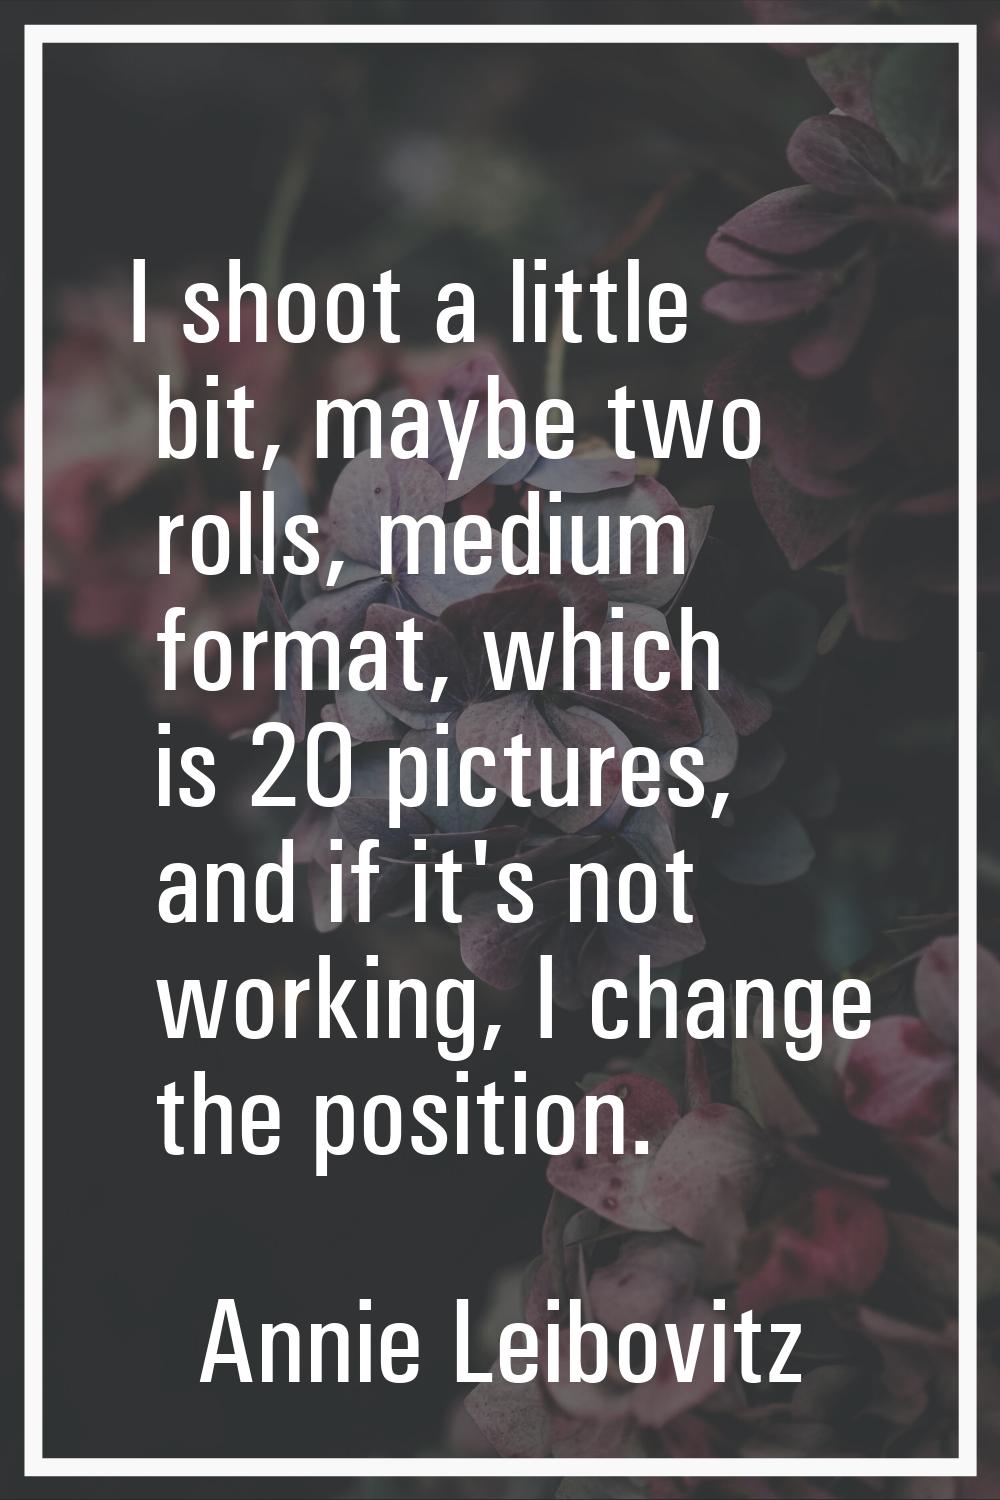 I shoot a little bit, maybe two rolls, medium format, which is 20 pictures, and if it's not working